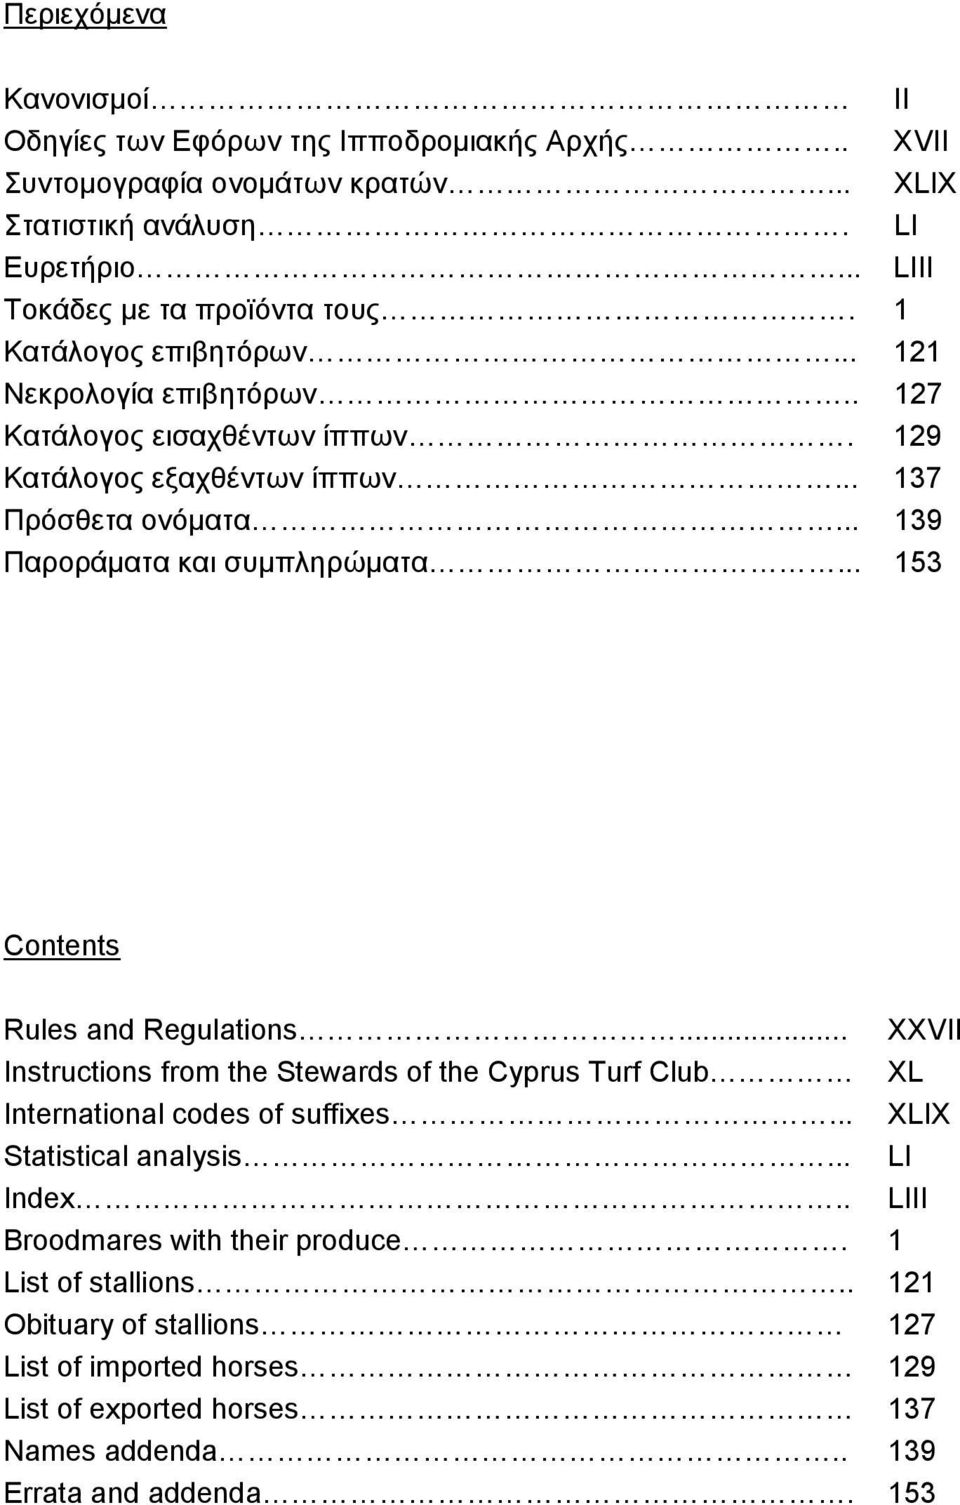 .. 153 Contents Rules and Regulations... XXVII Instructions from the Stewards of the Cyprus Turf Club XL International codes of suffixes... XLIX Statistical analysis... LI Index.